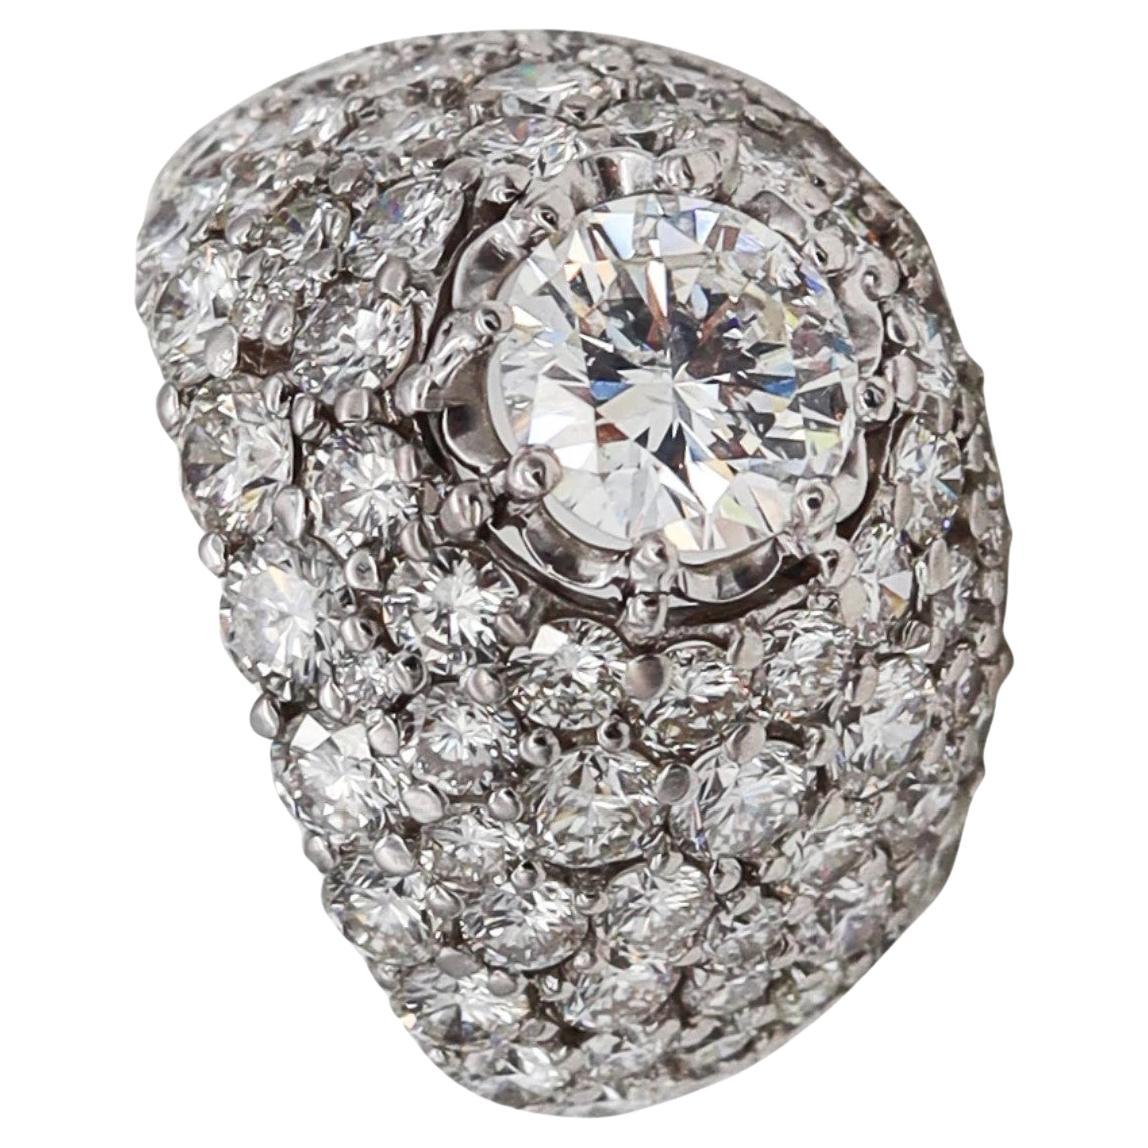 Yanes Exceptional Platinum Cluster Cocktail Ring Gia Certified 10.16 Ctw Diamond For Sale